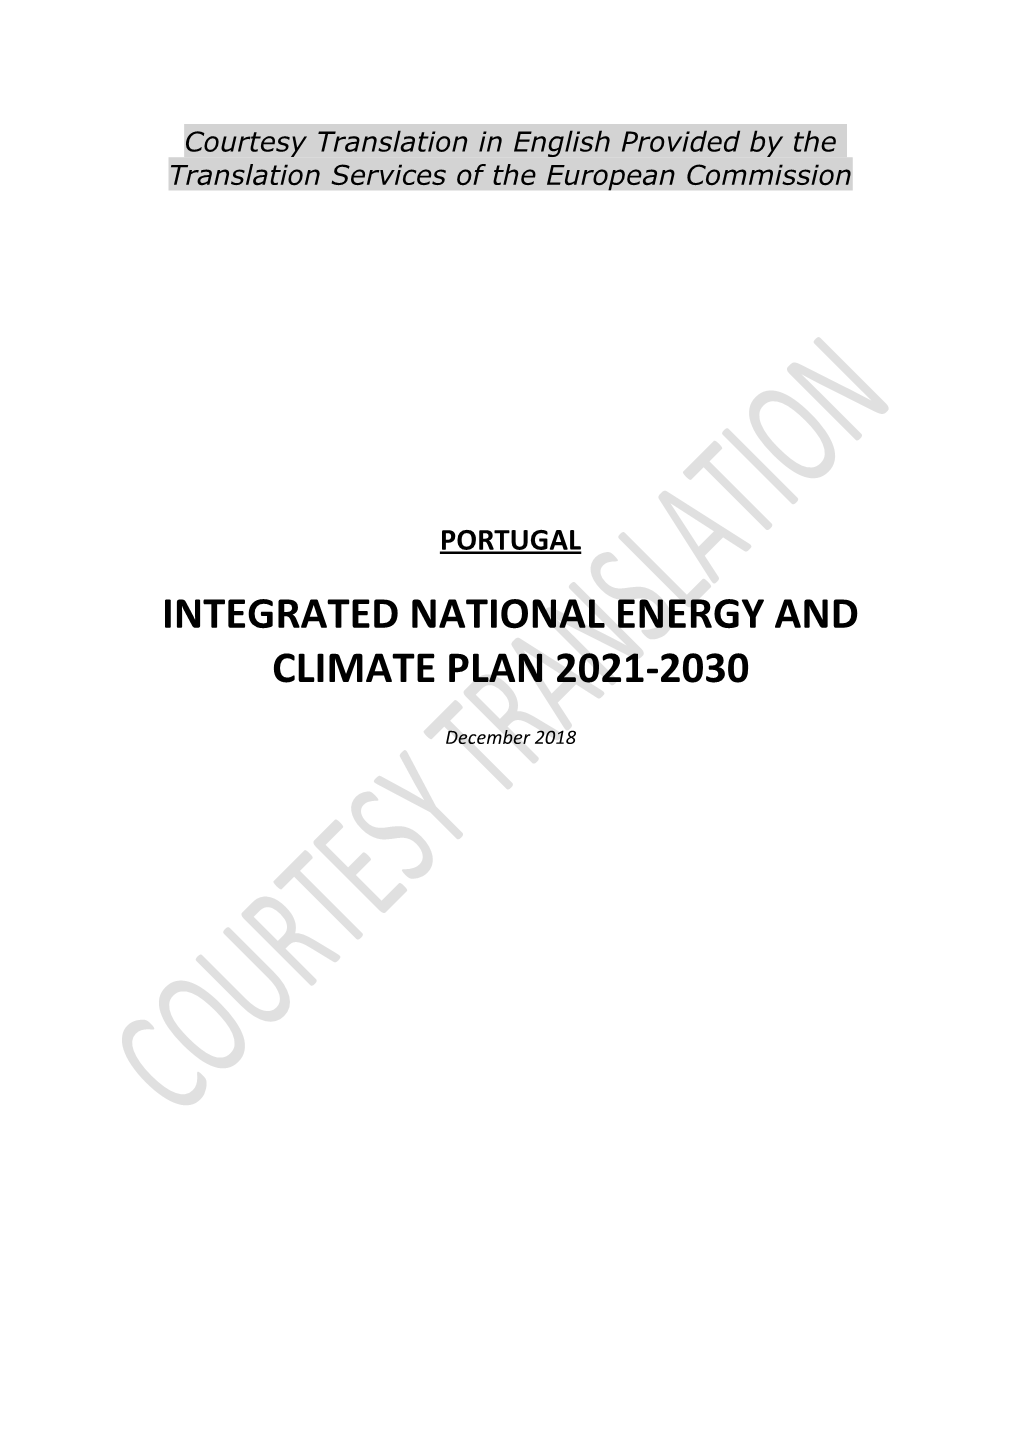 Integrated National Energy and Climate Plan 2021-2030